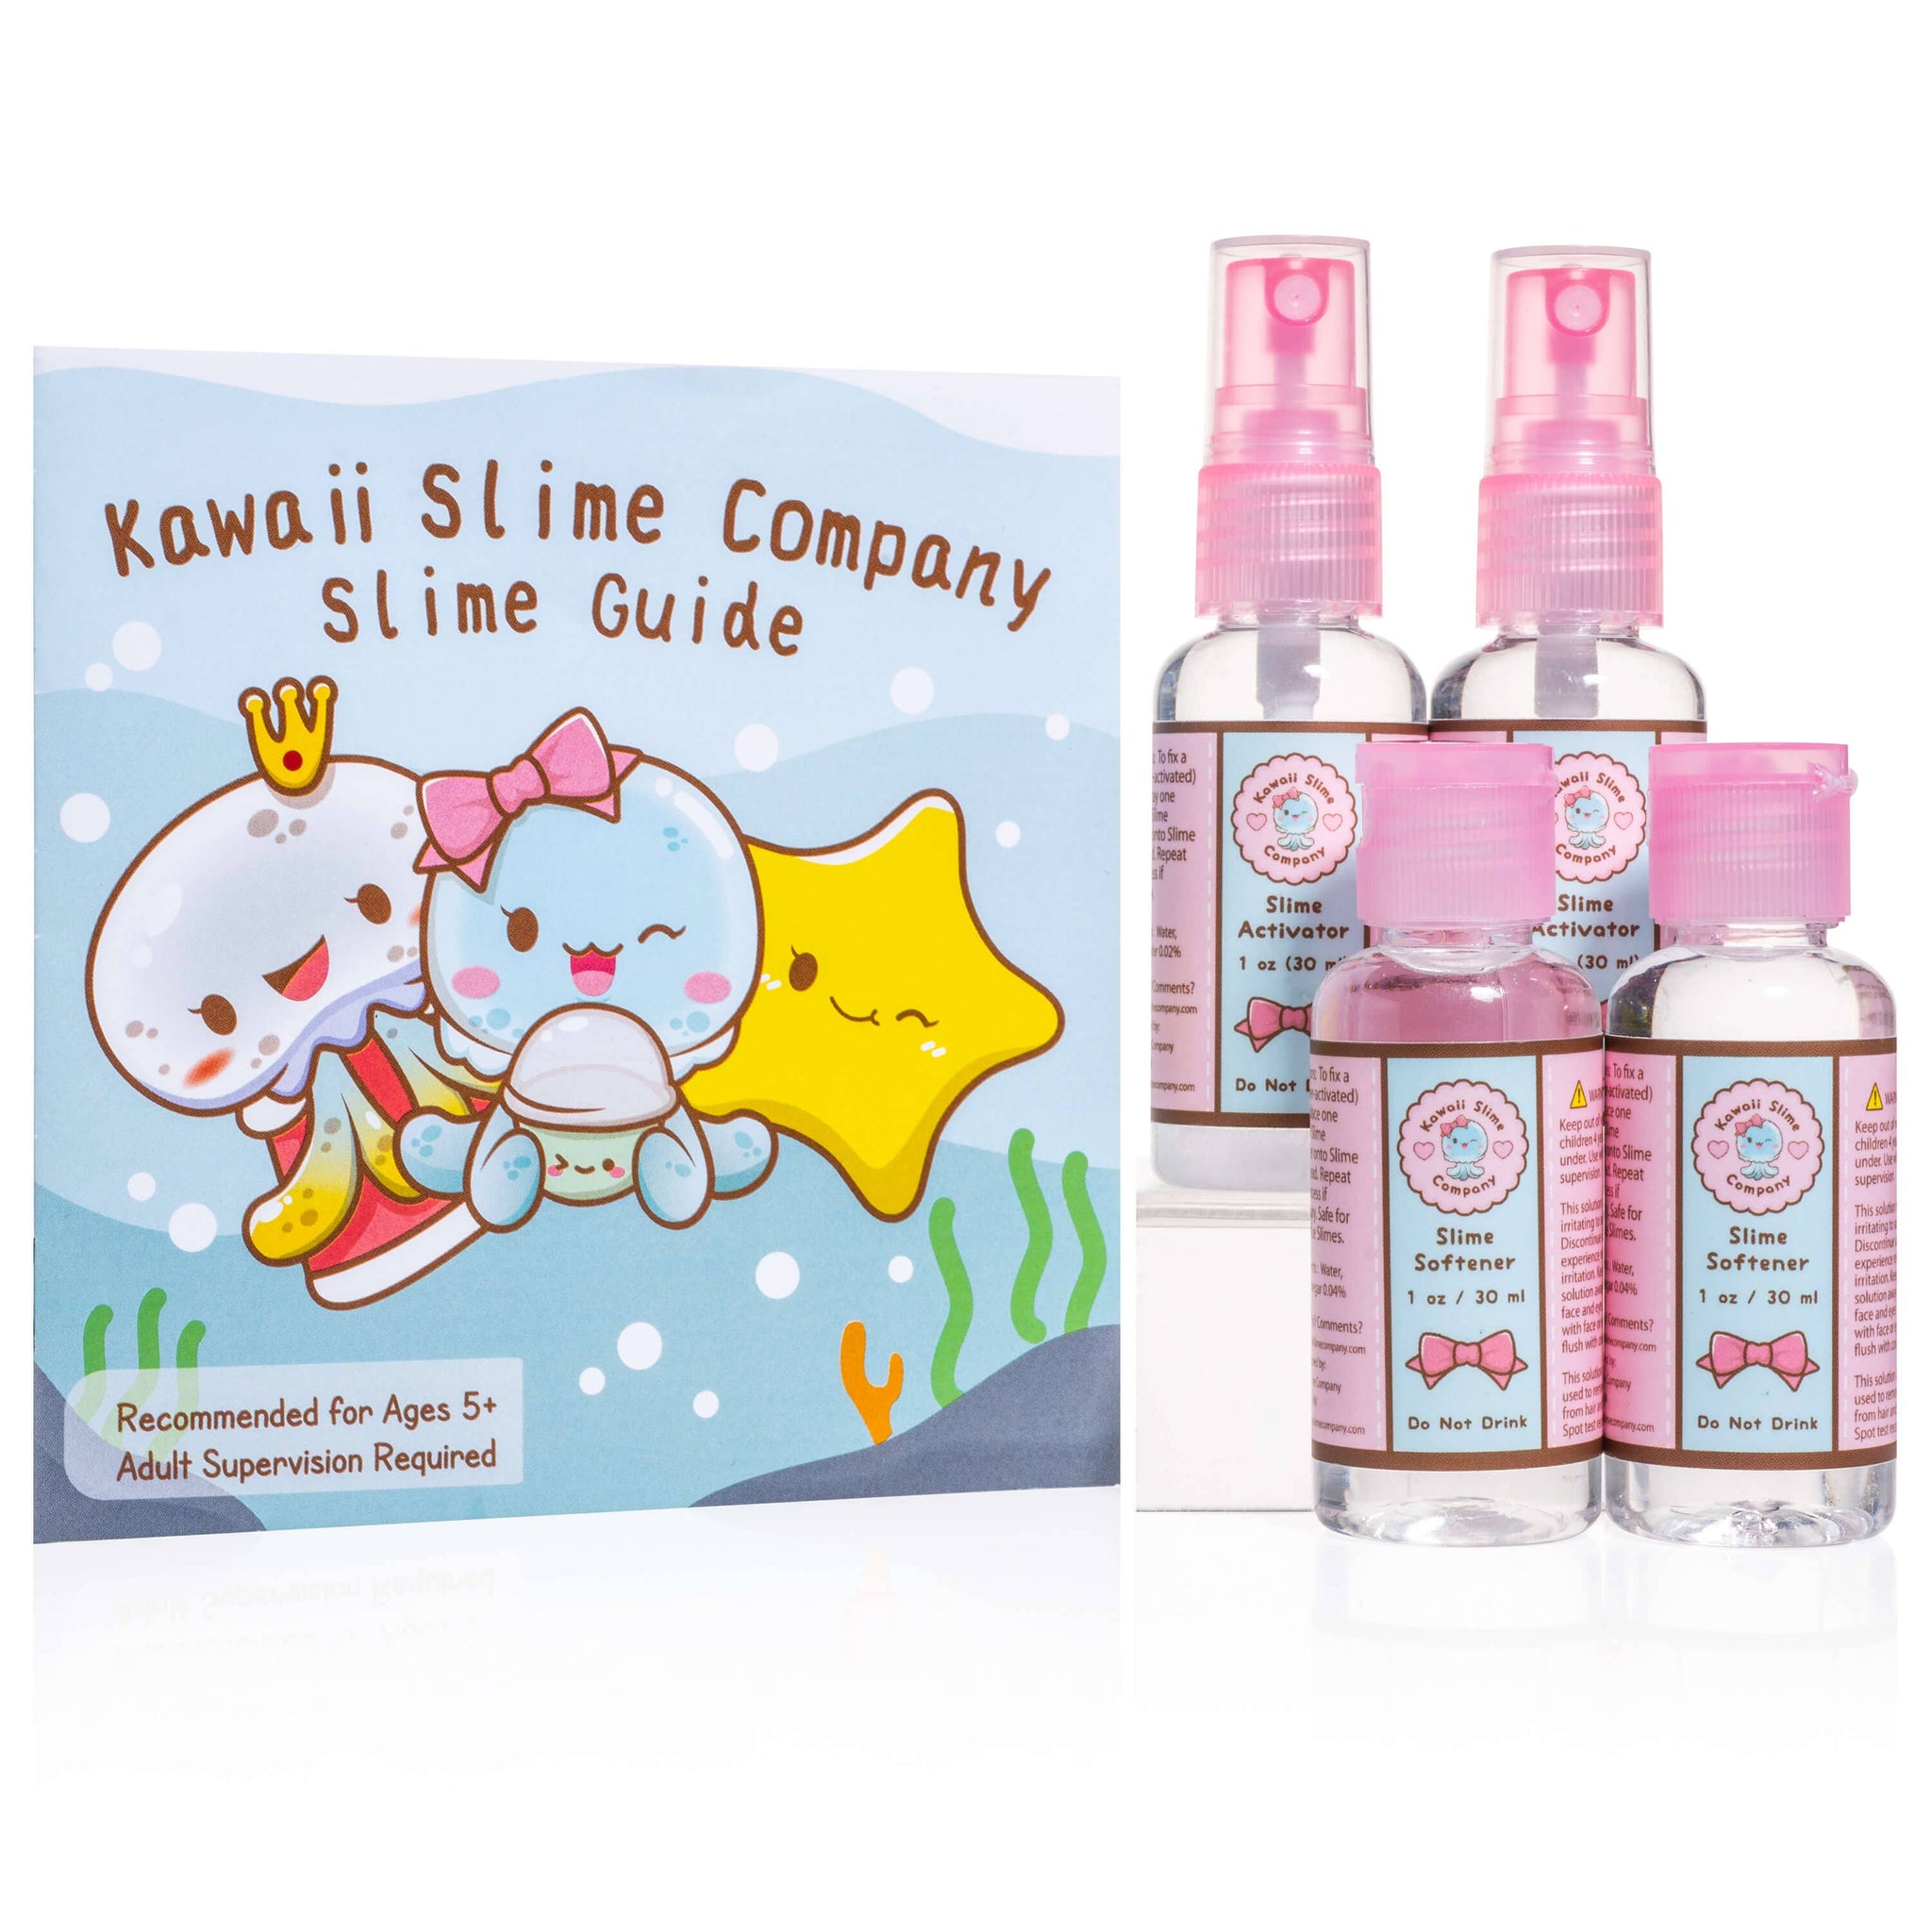 Slime Care Kit - Take Care Of Your Slime!